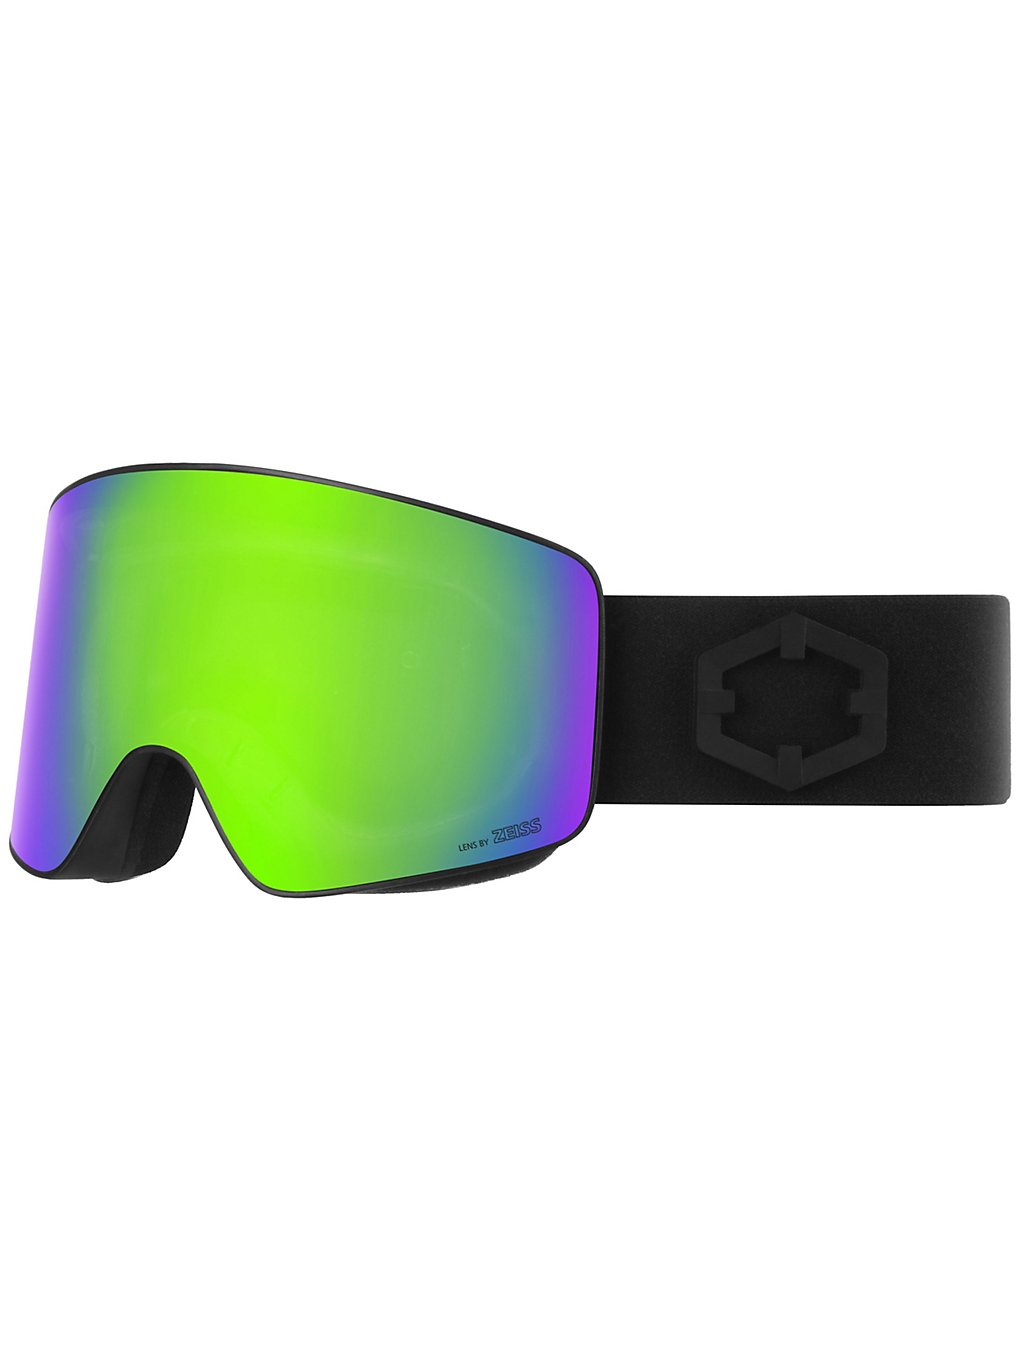 Out Of Void Black Goggle green mci